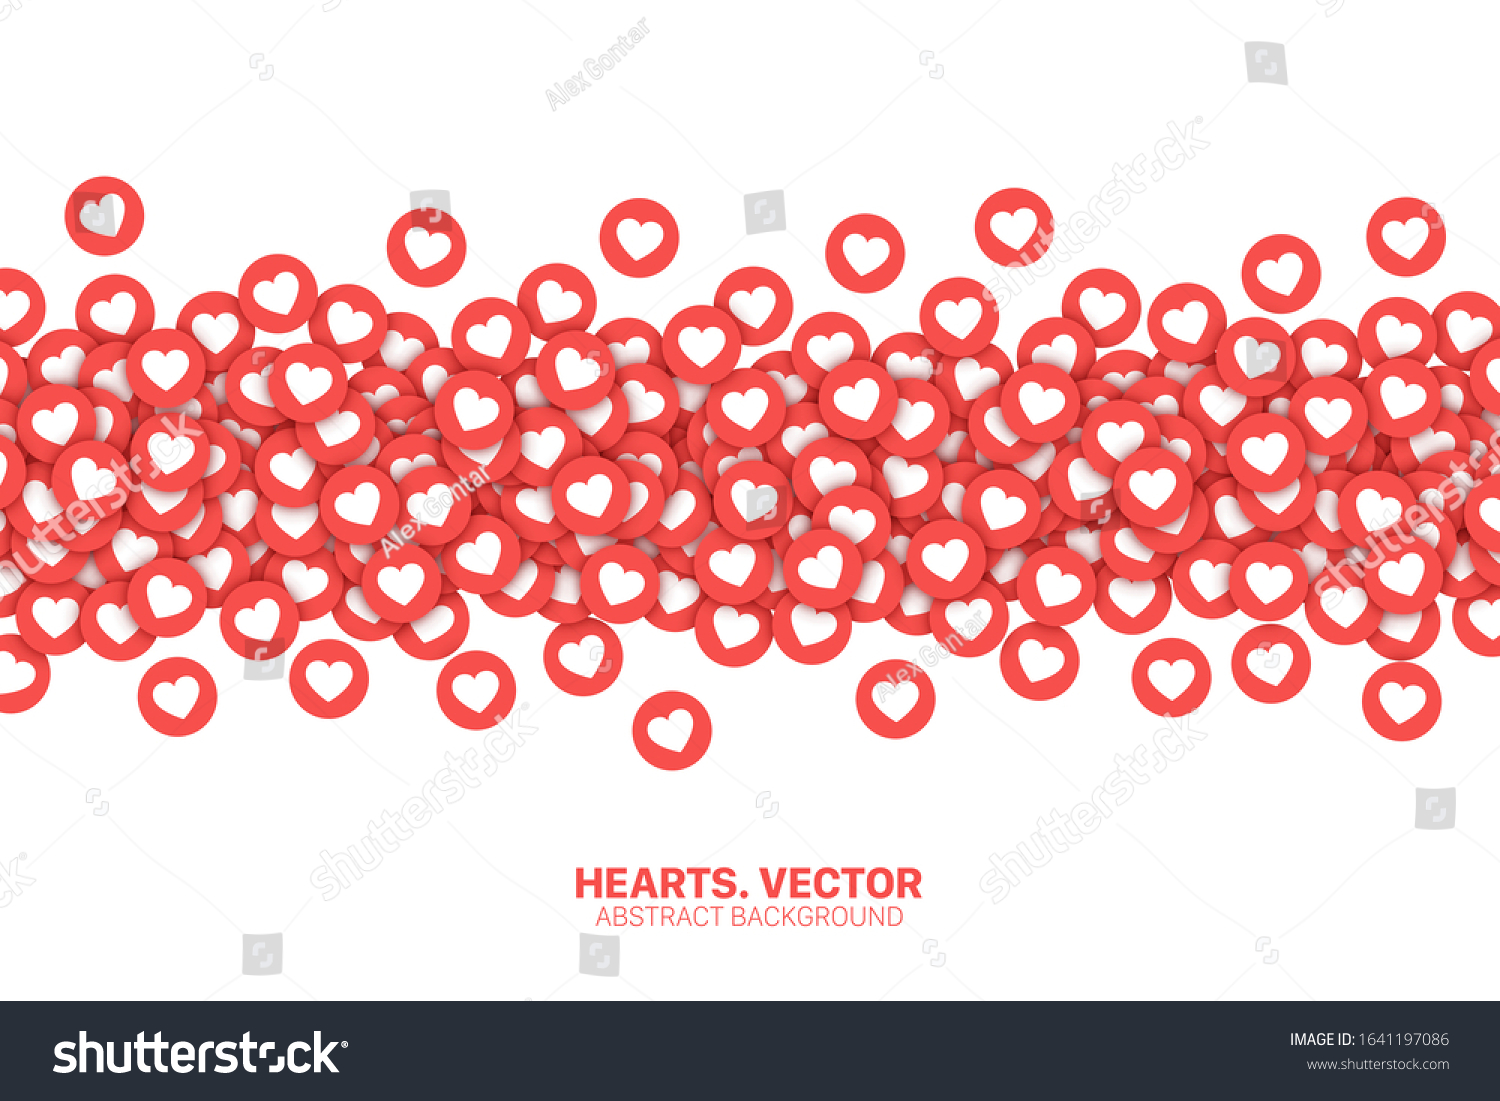 SVG of Vector Hearts Red Flat Icons Isolated On White Background. Lot Of Likes Conceptual Abstract Illustration. Love Design Template. Social Media Network Backdrop svg